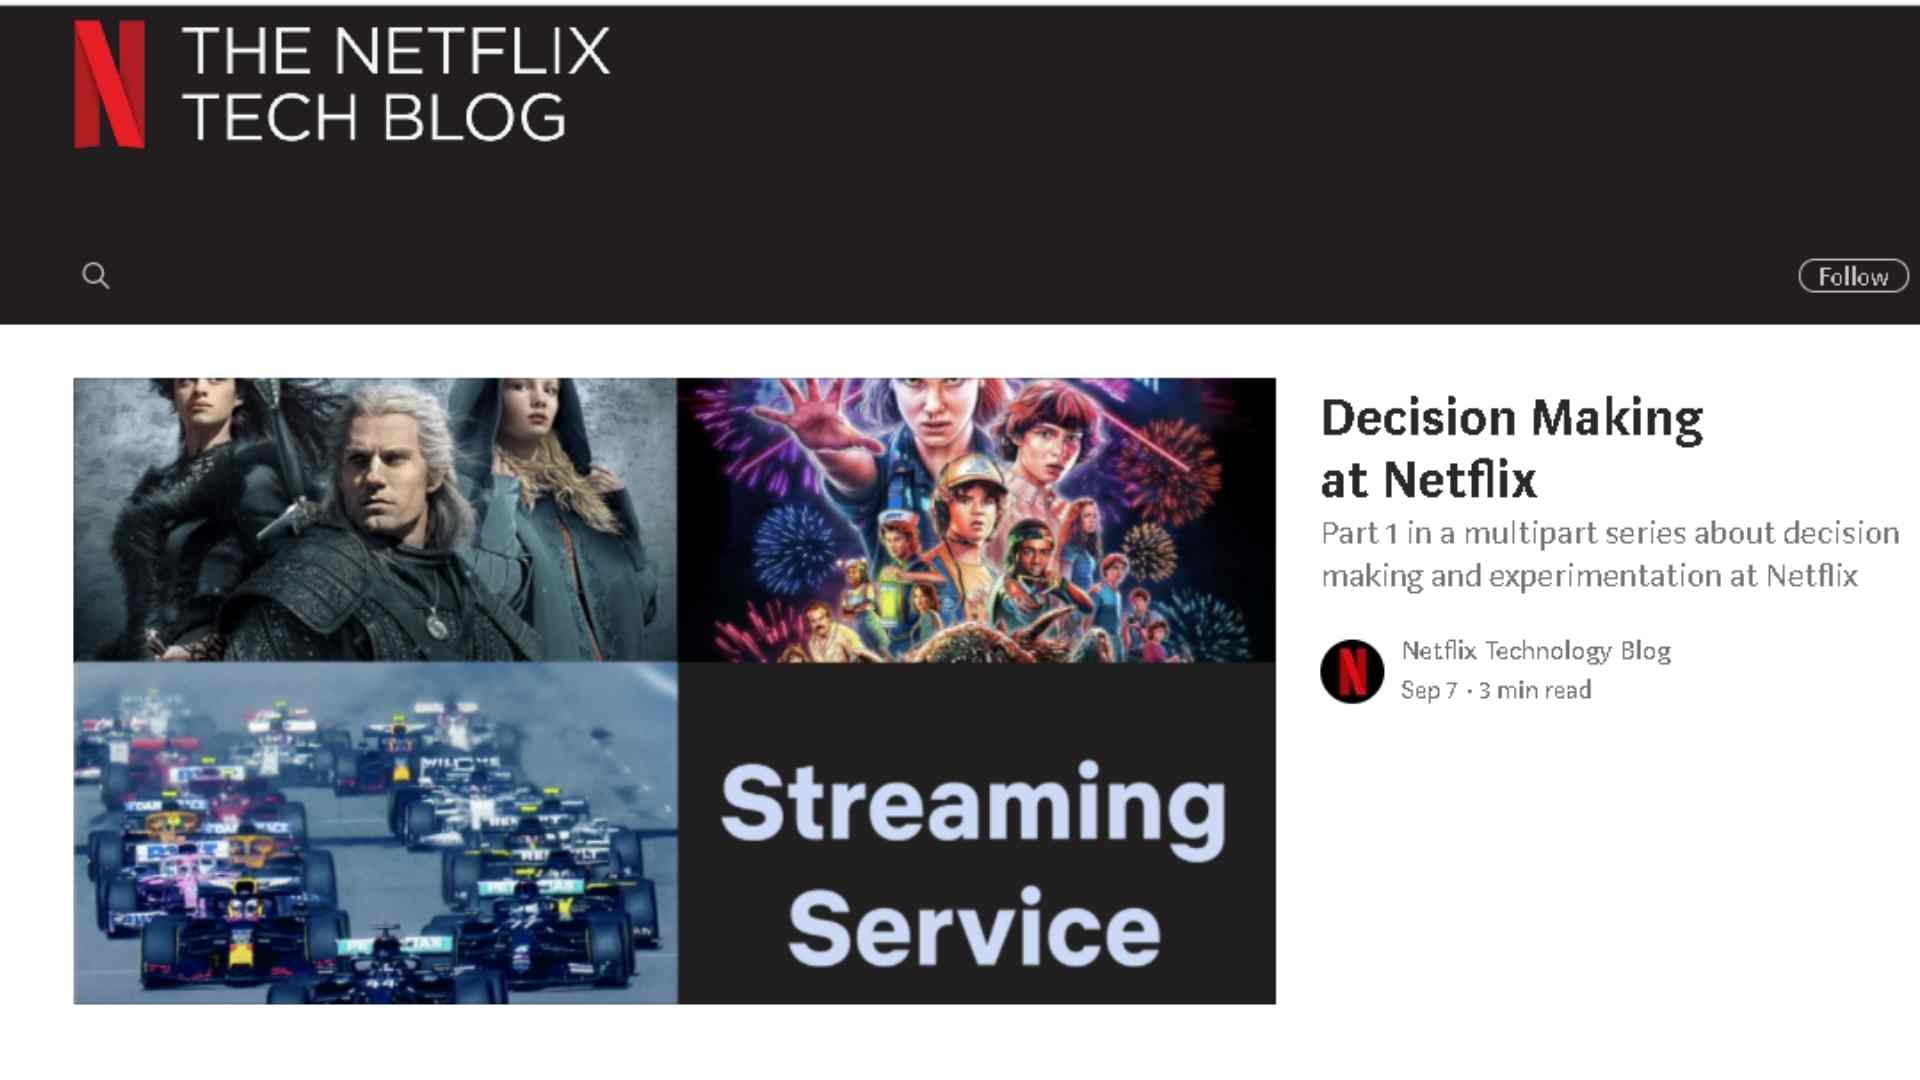 Netflix Tech Blog in an article about the digital presence of the brand